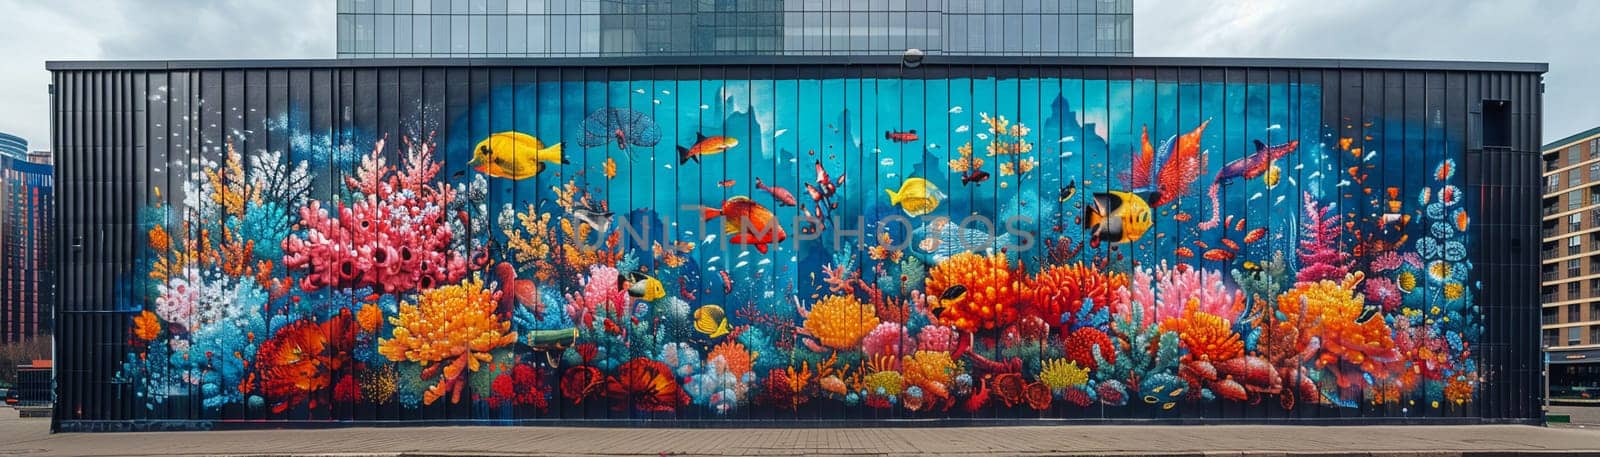 Vivid street art covering an entire building, showcasing creativity and urban expression.